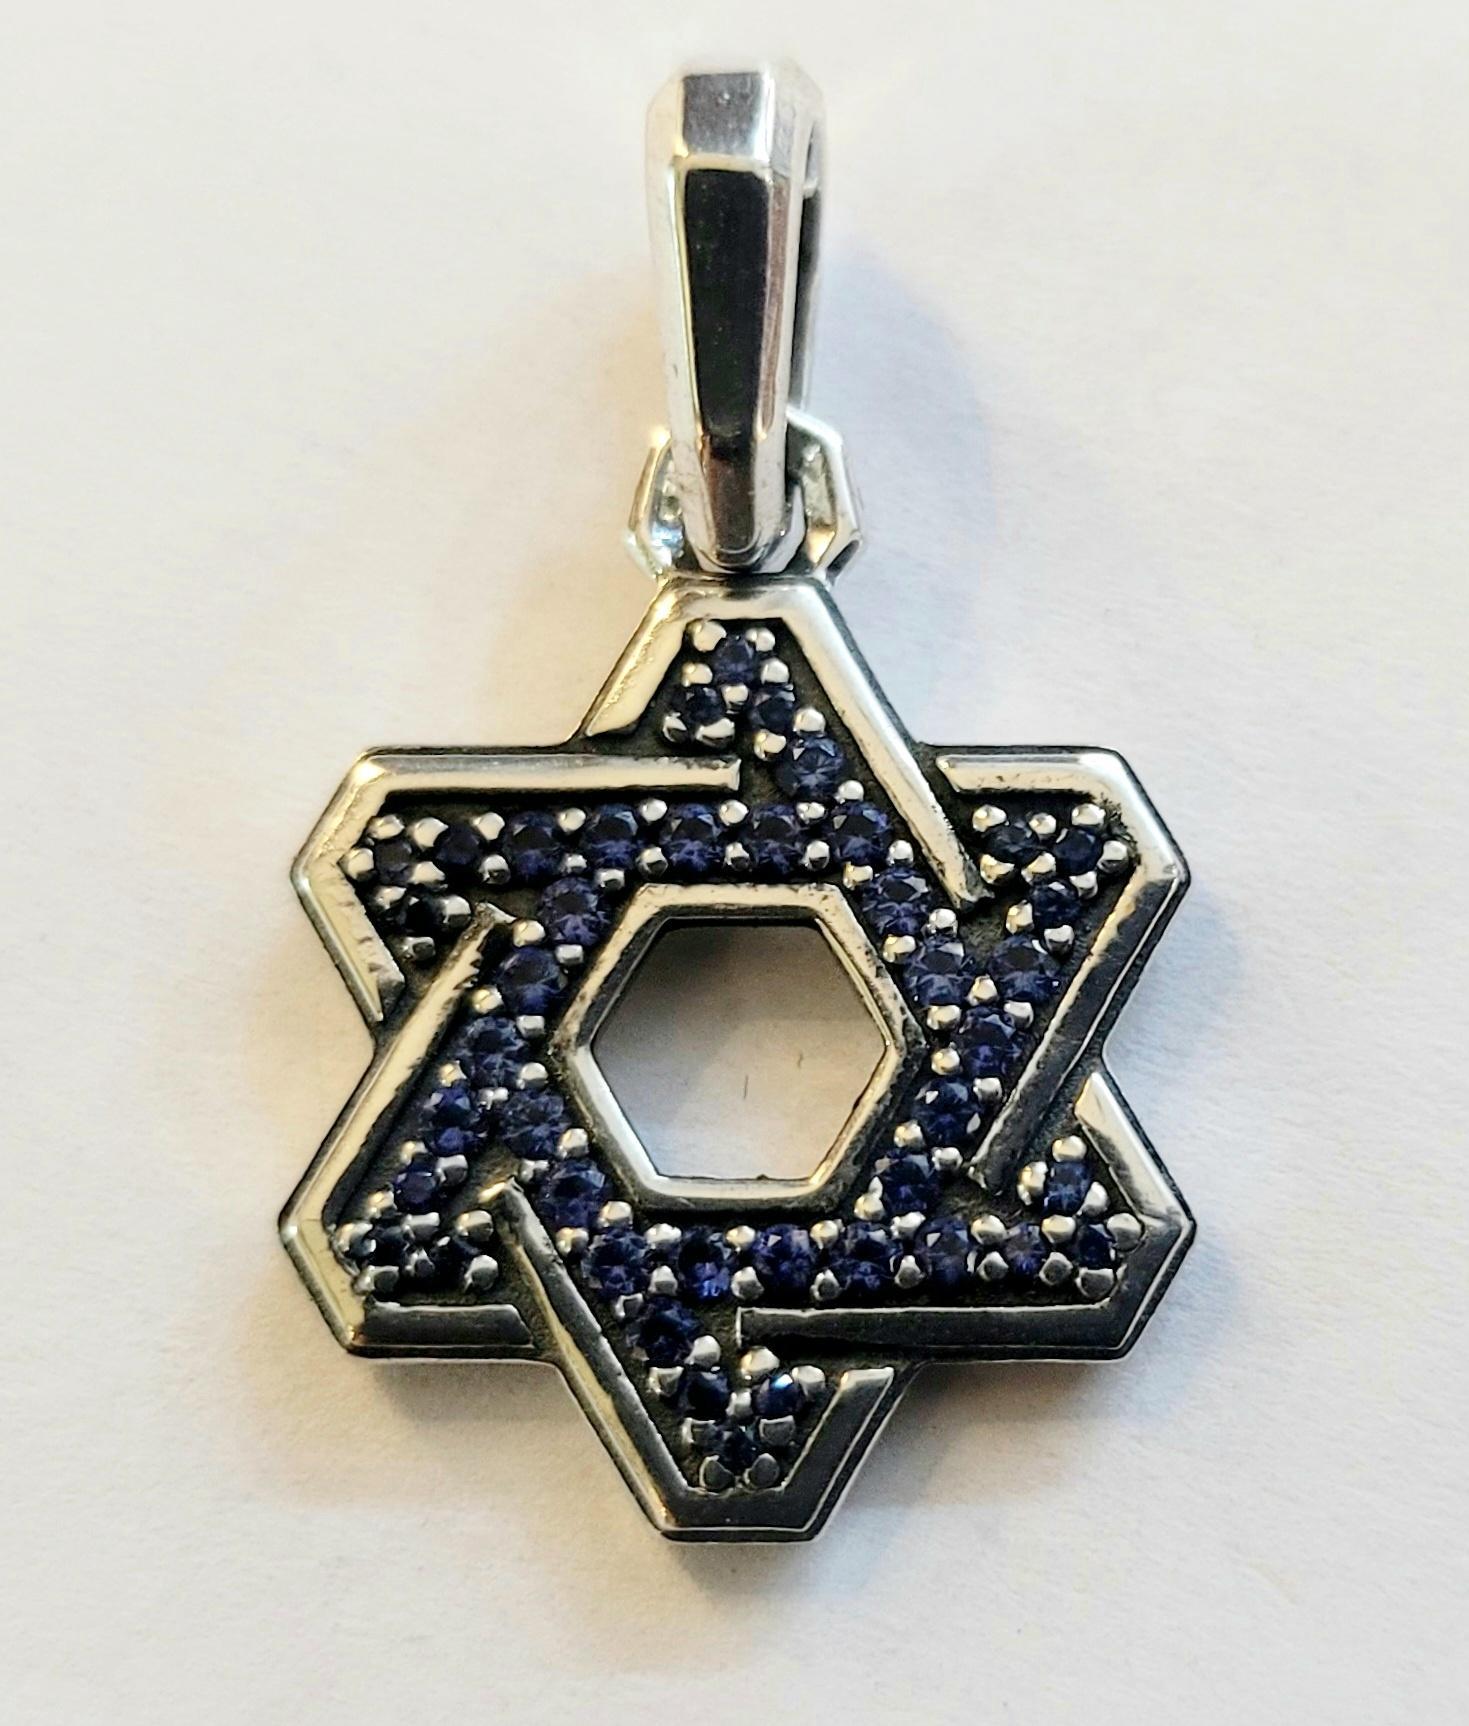 David yurman
Deco Star of David Pendant
Deco Collection for Men
Material Sterling Silver
Metal Purity 925
Pendant Dimension 19.8 X 19.3mm
Pendant Weight 5.4gr
Condition New, never worn
Comes with David Yurman pouch
Retail Price $795